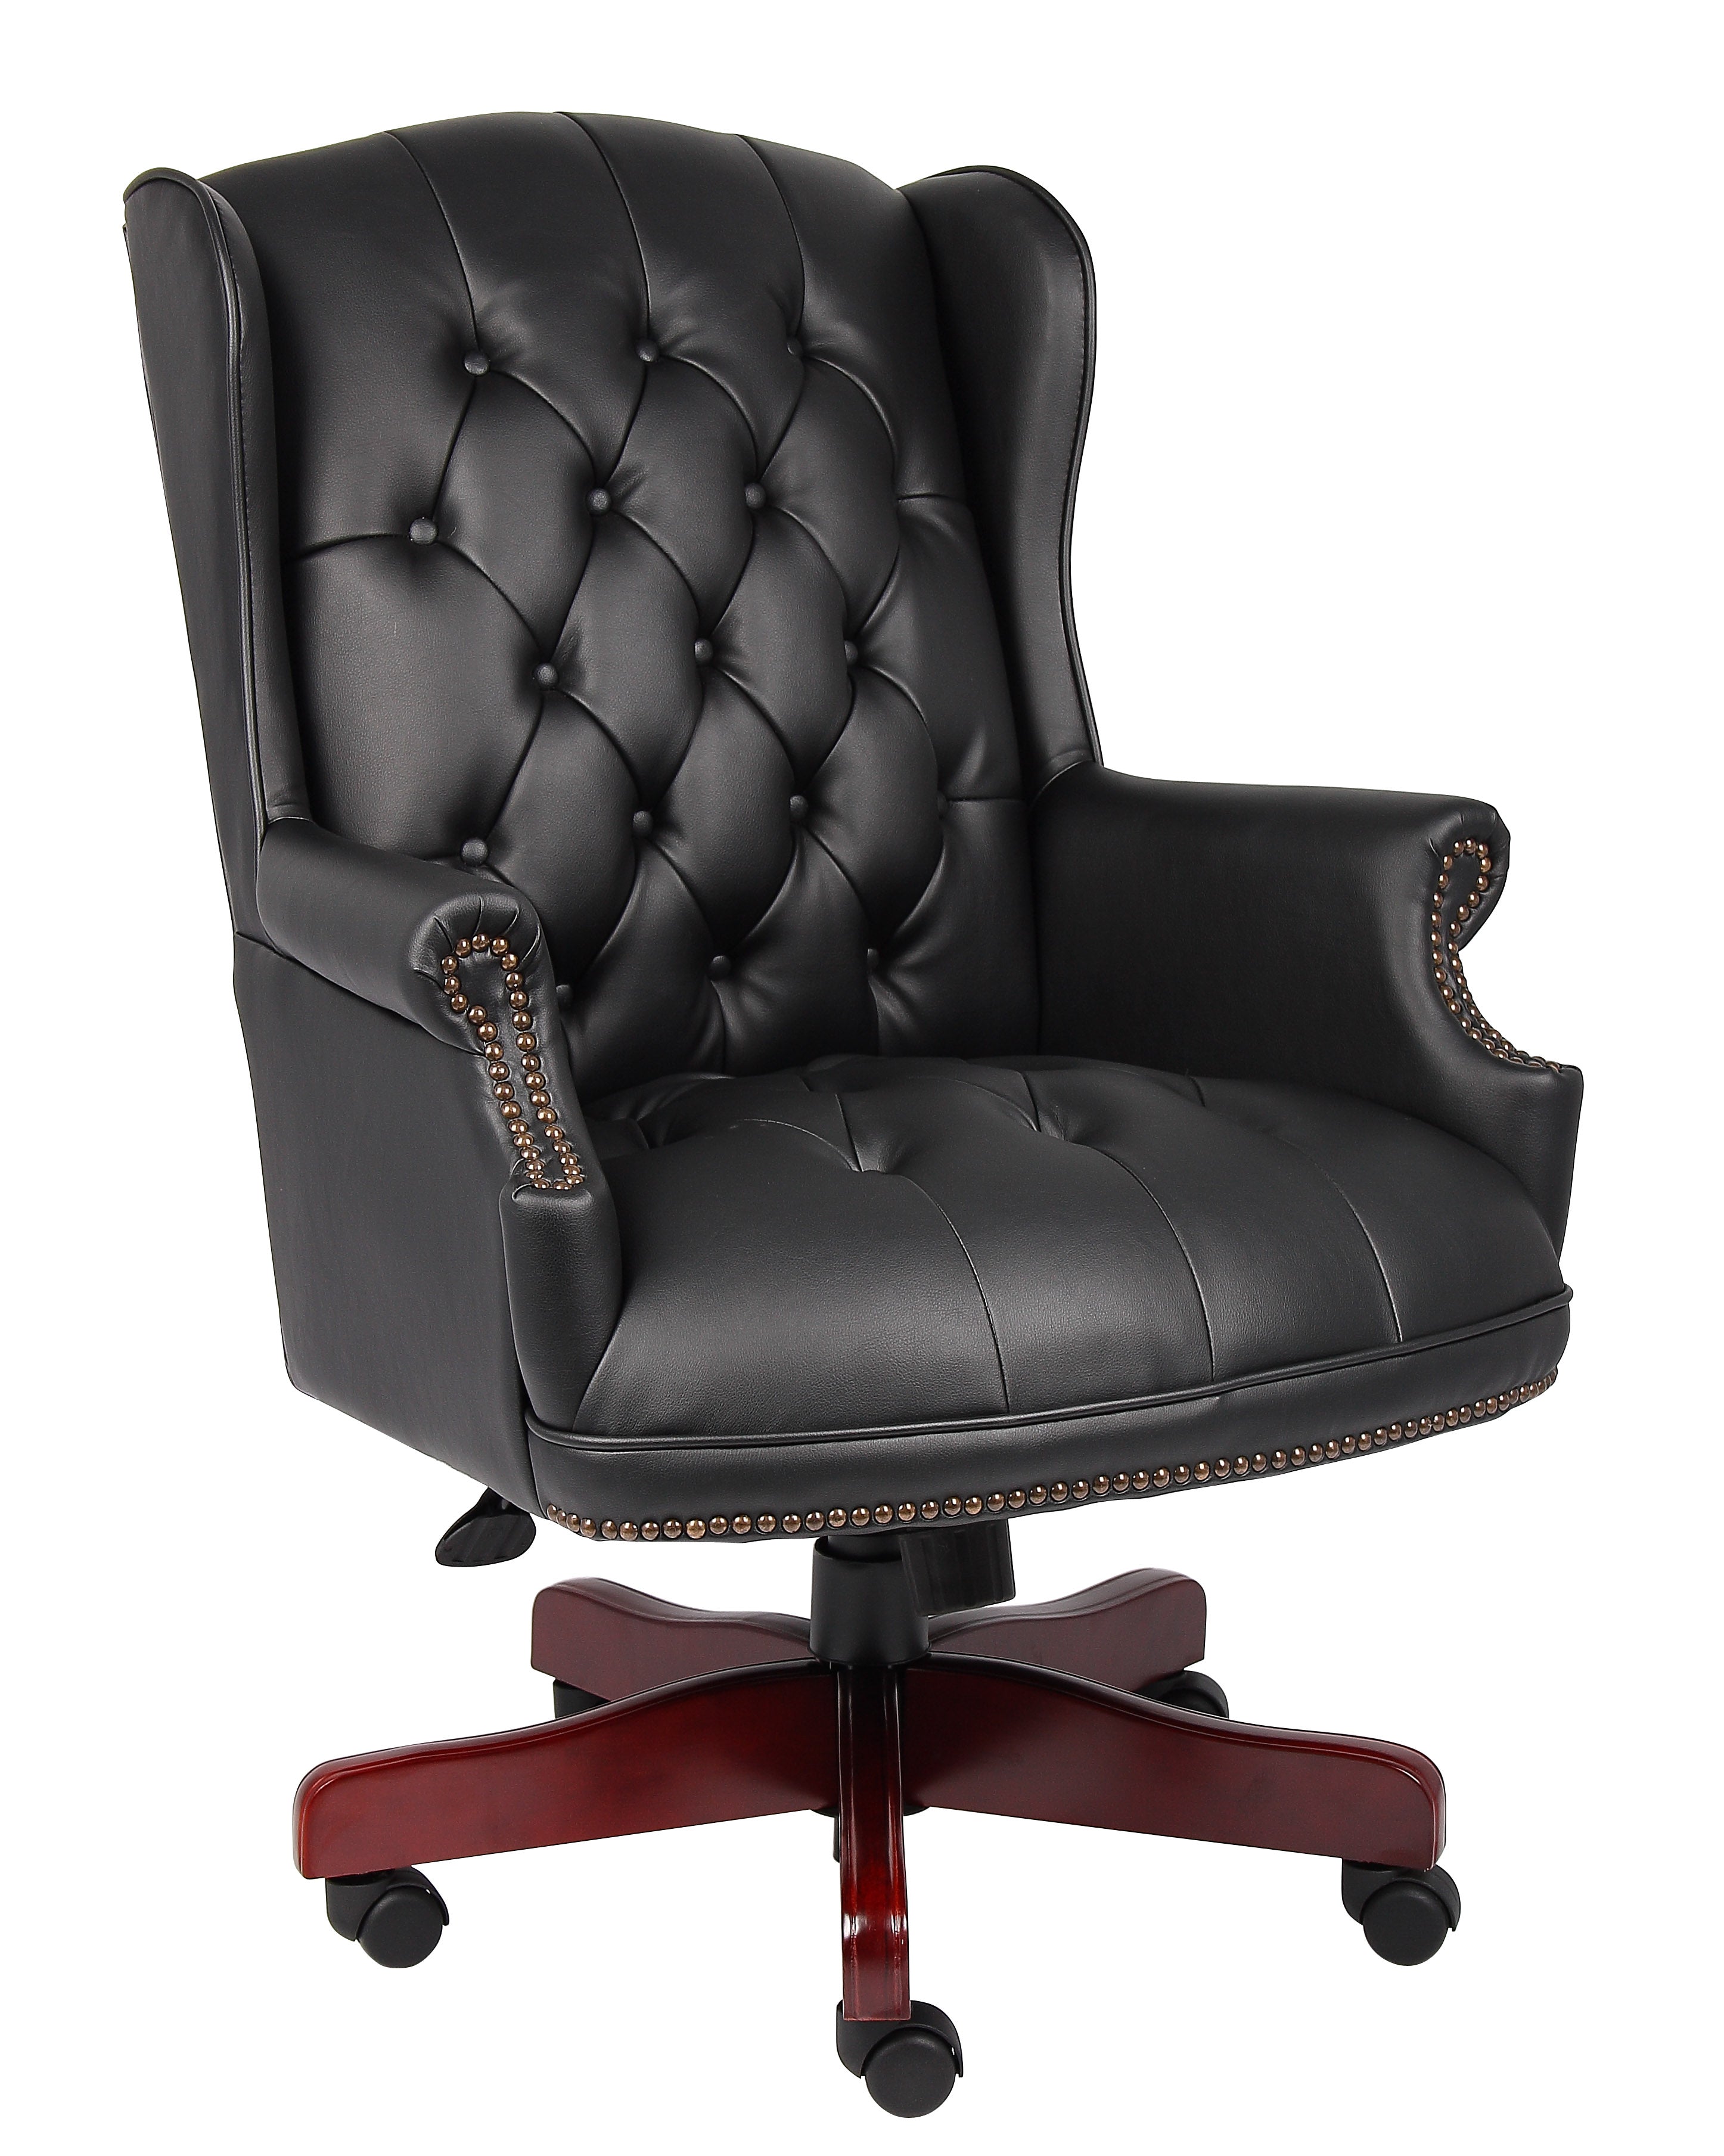 B800 - Bankers Traditional Office Desk Chair by Boss